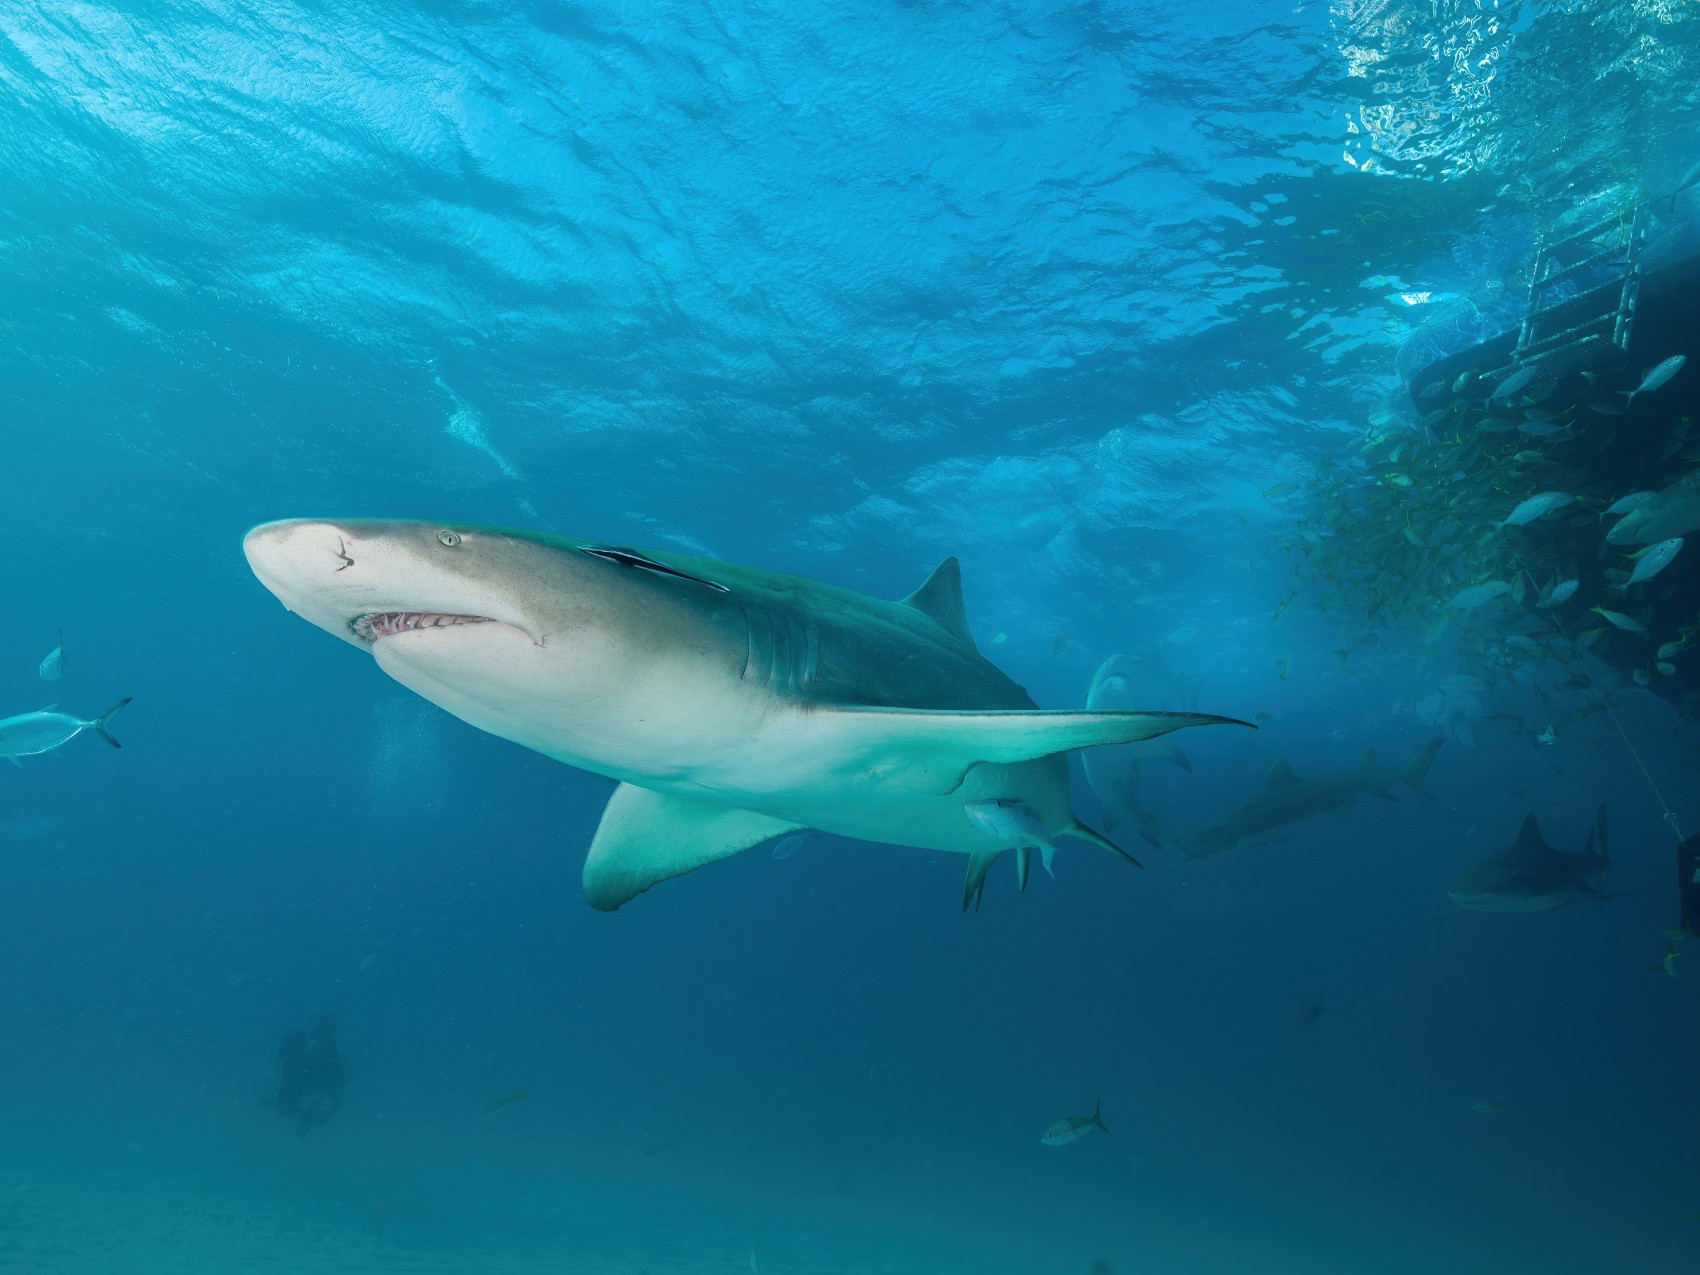 A new study suggests sharks use the Earth's magnetic field to find their way around. The research was done on bonnethead sharks, no pictured here. 